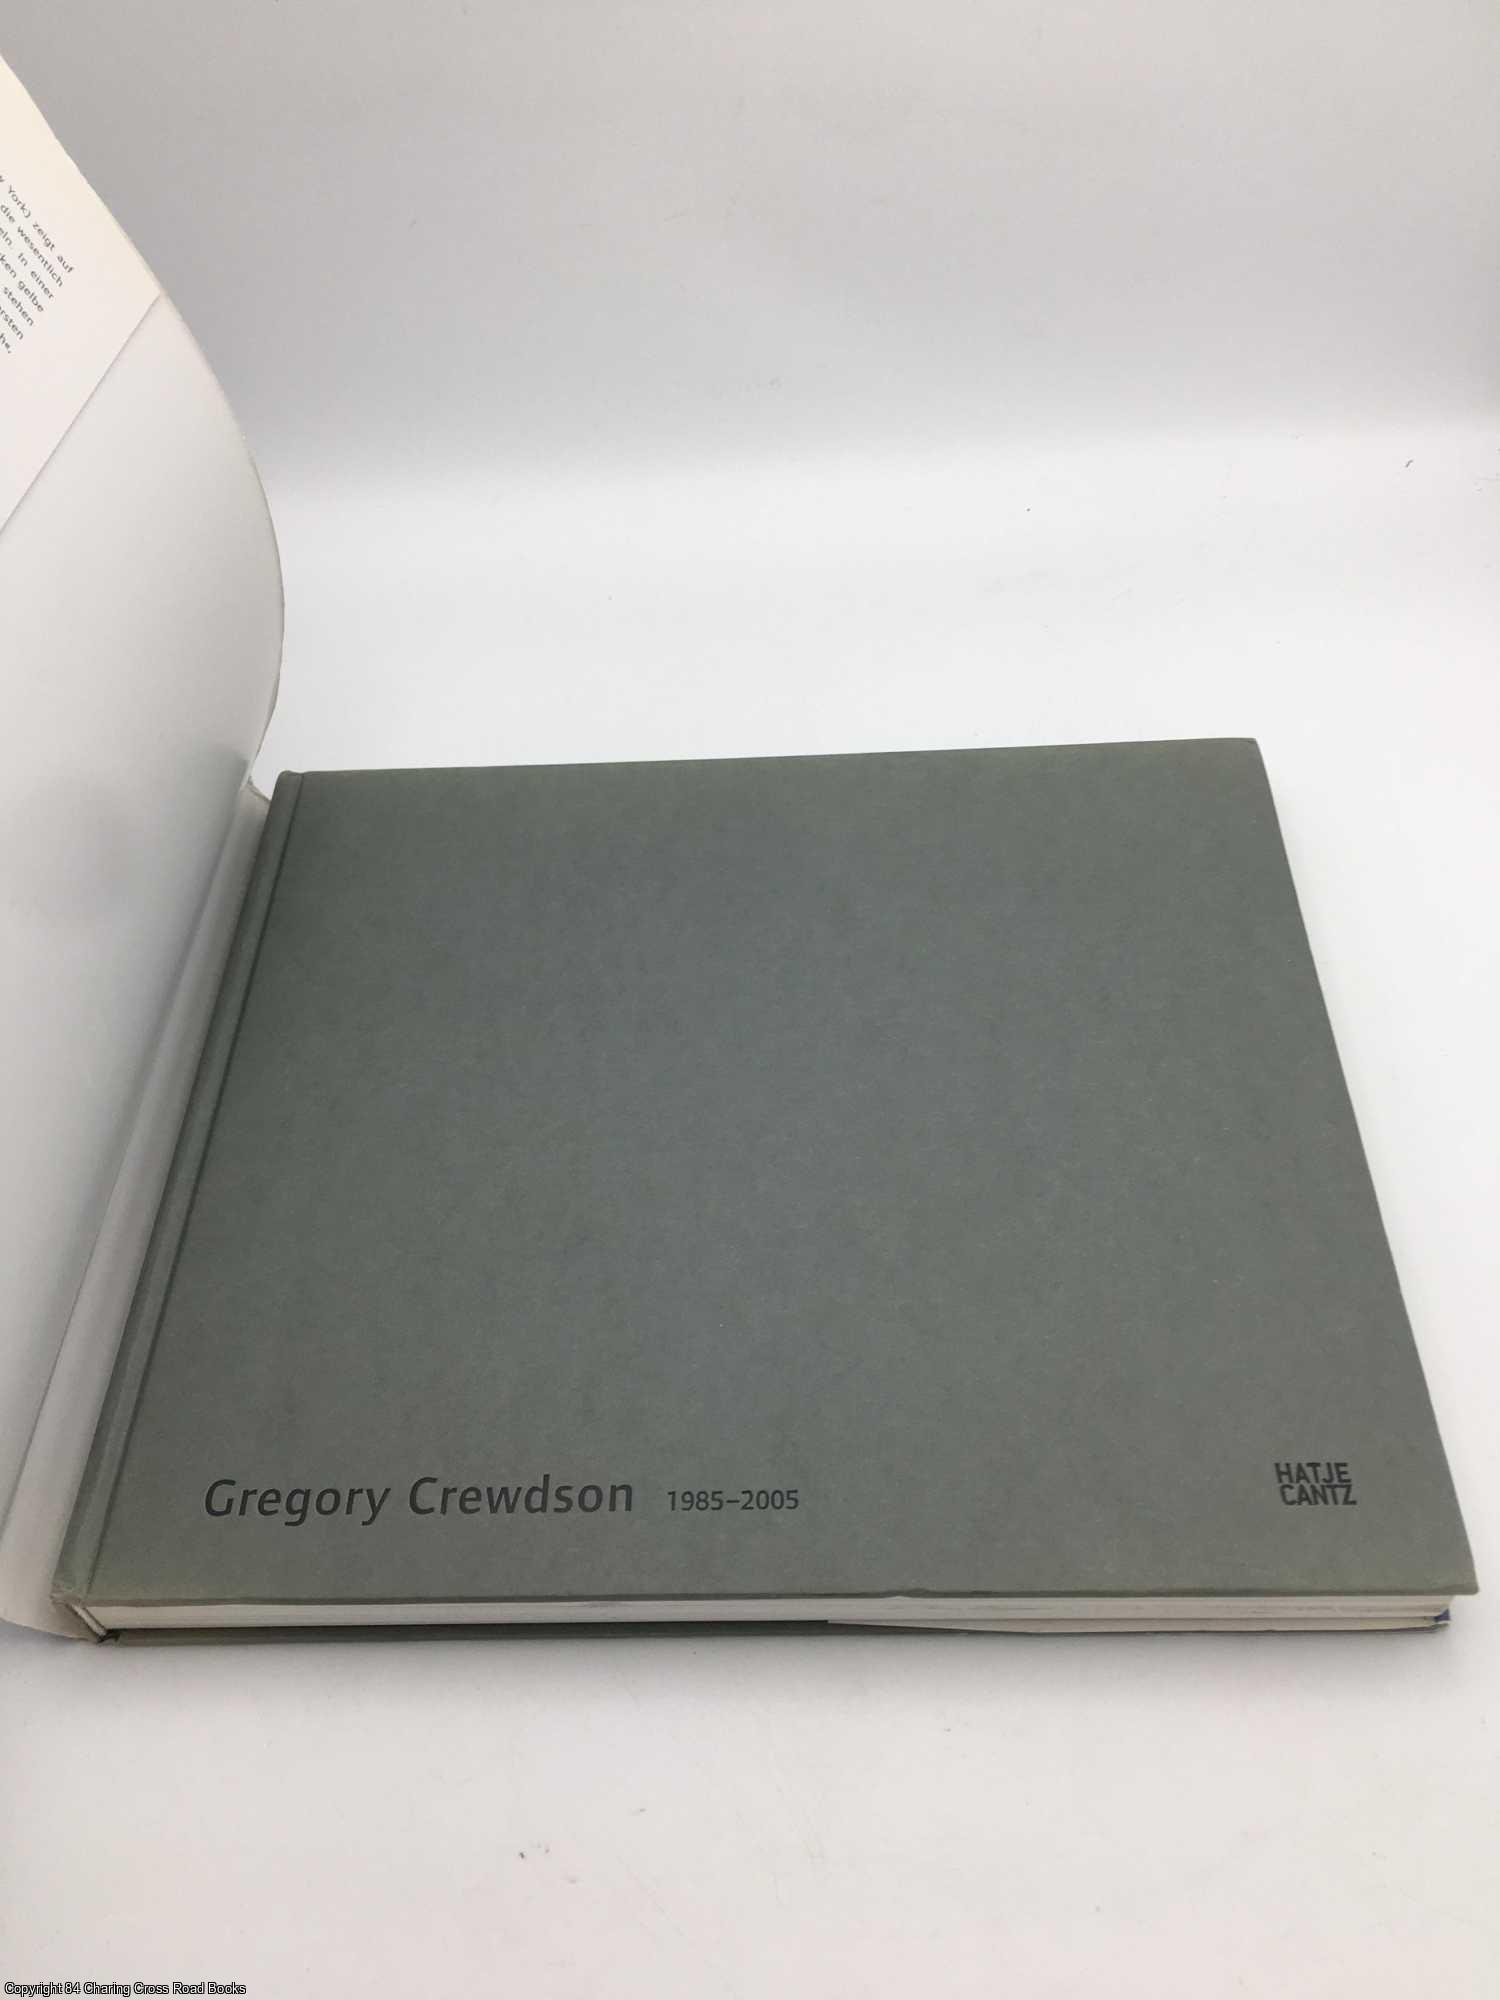 Gregory Crewdson: 1985-2005 by Stephan Berg on 84 Charing Cross Rare Books